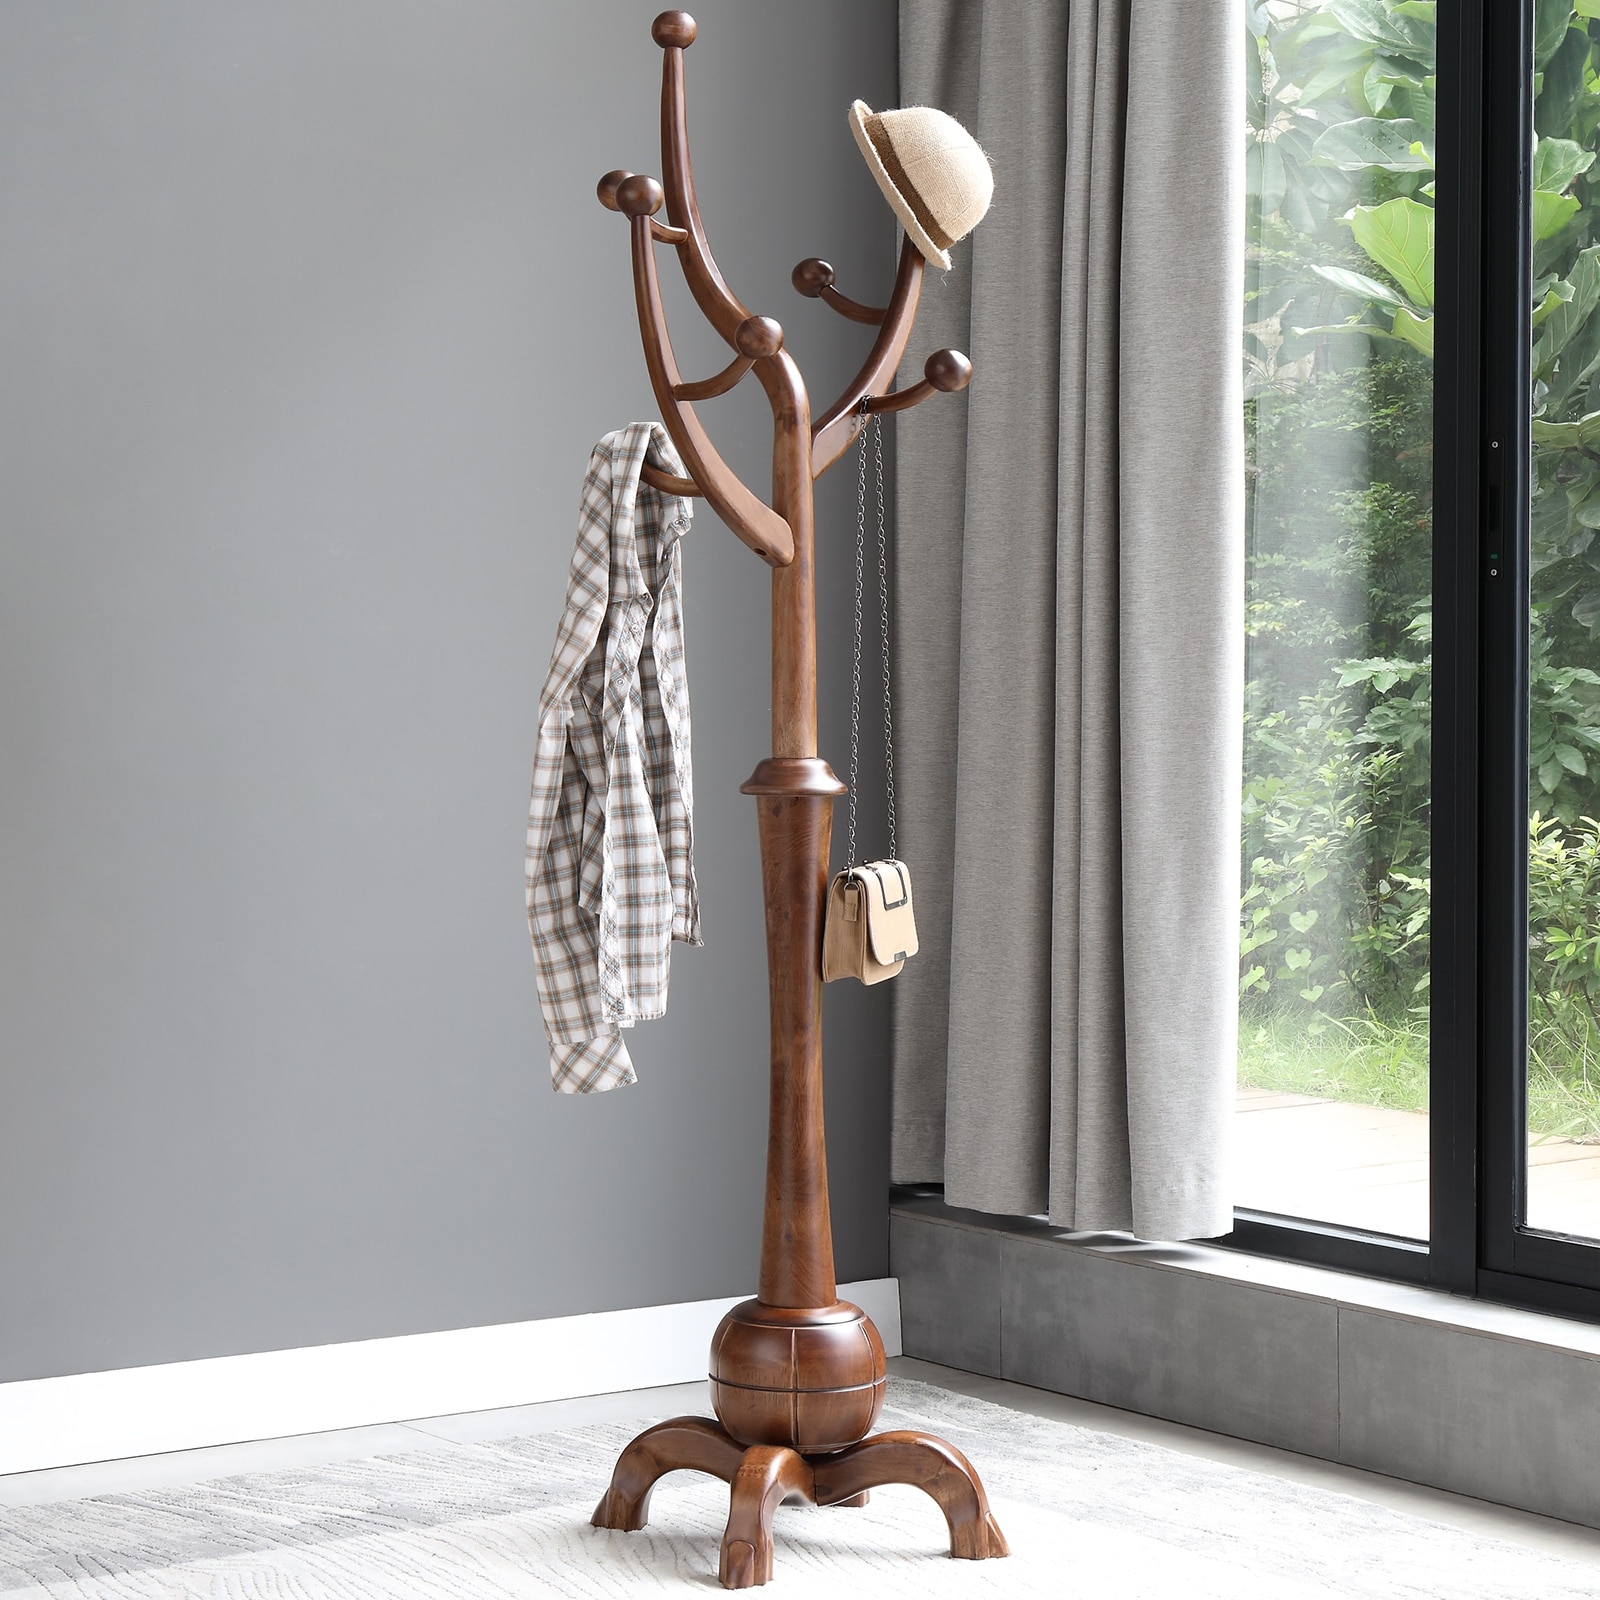 https://ak1.ostkcdn.com/images/products/is/images/direct/444f0de8dfb9aa70250c2811f4157581ba4062d2/Creative-Tree-branch-Rubberwood-Freestanding-Coat-Rack-with-8-Hooks.jpg